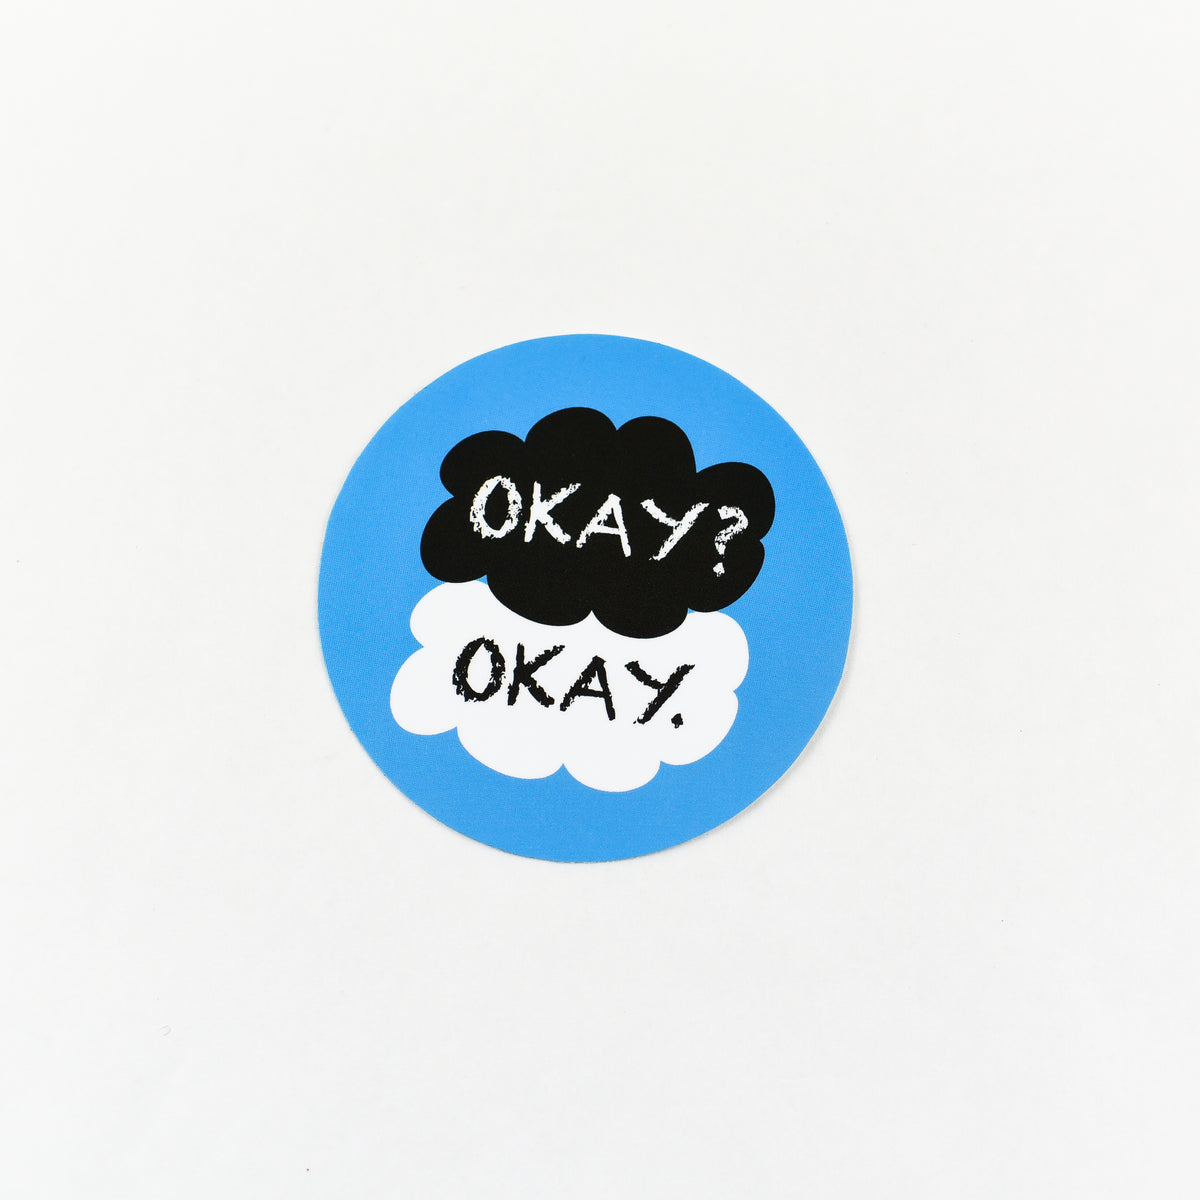 The Fault in Our Stars Sticker is a blue circle and a black cloud and a white cloud with the words &quot;Okay? Okay.&quot;